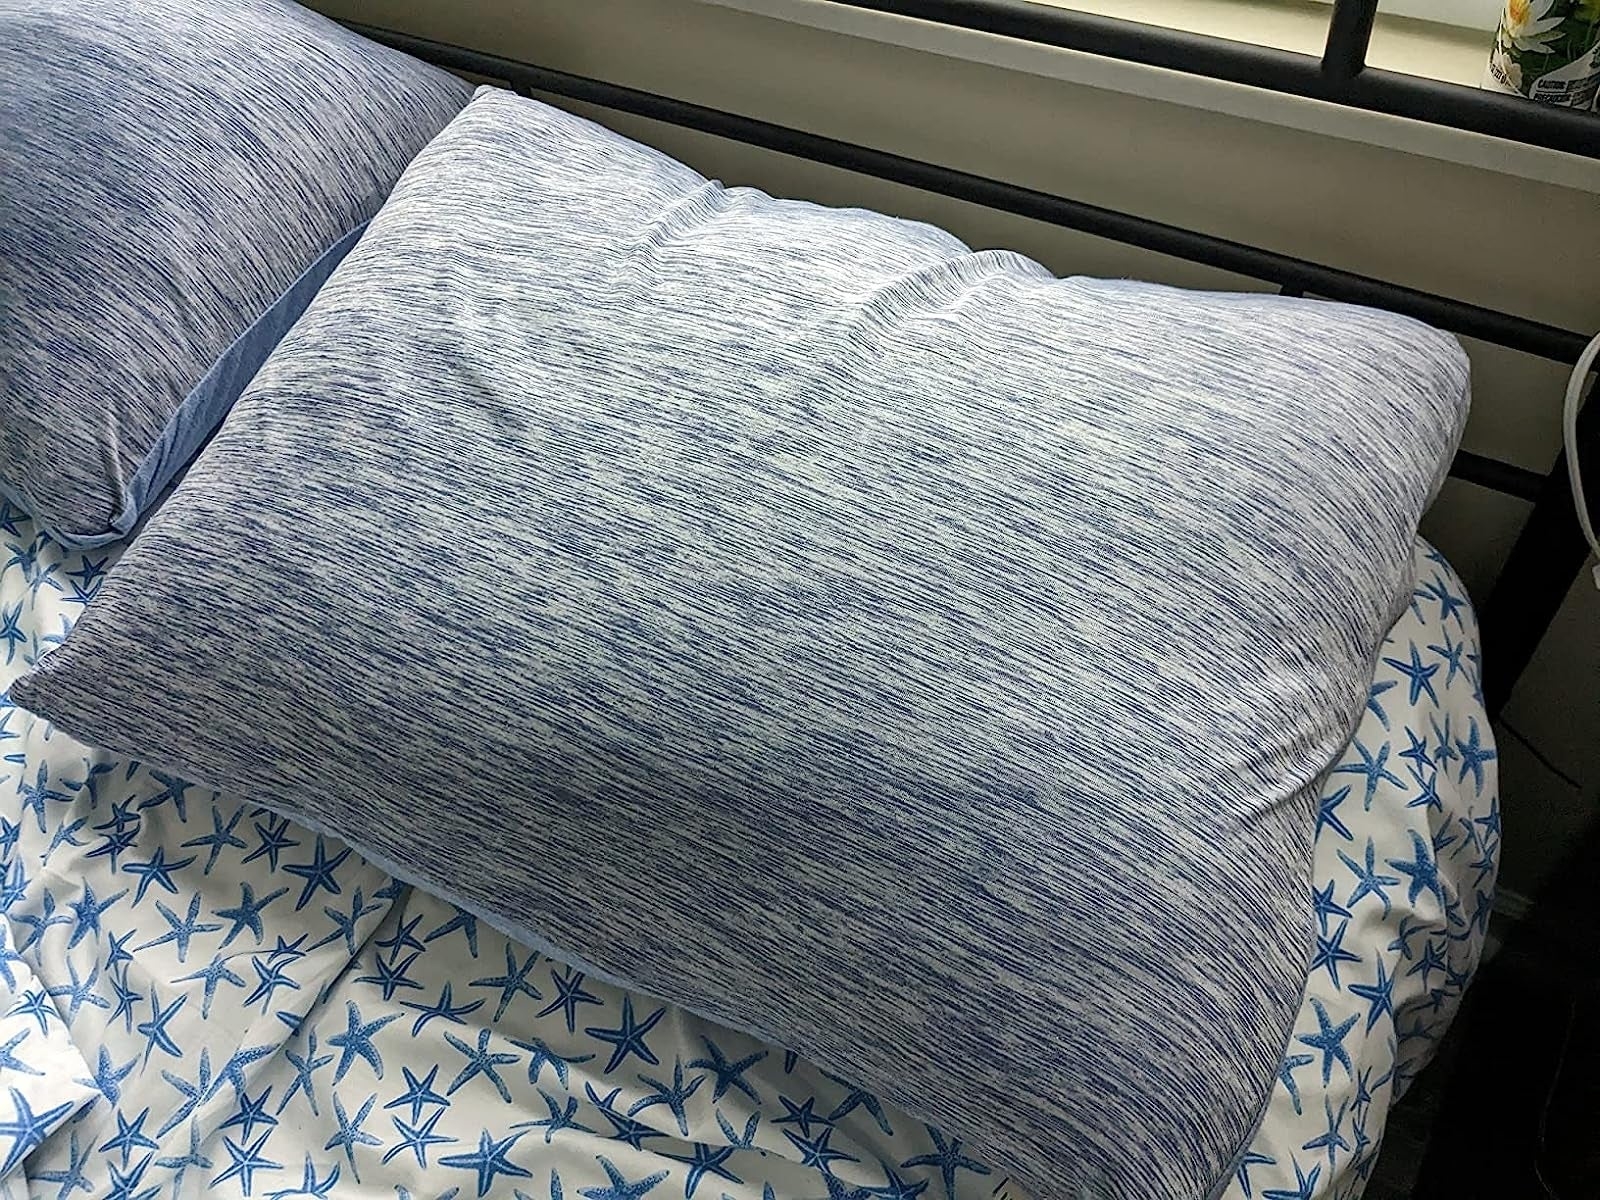 I'm a Hot Sleeper Who Tried the Evercool Cooling Sheets — Here are My  Thoughts